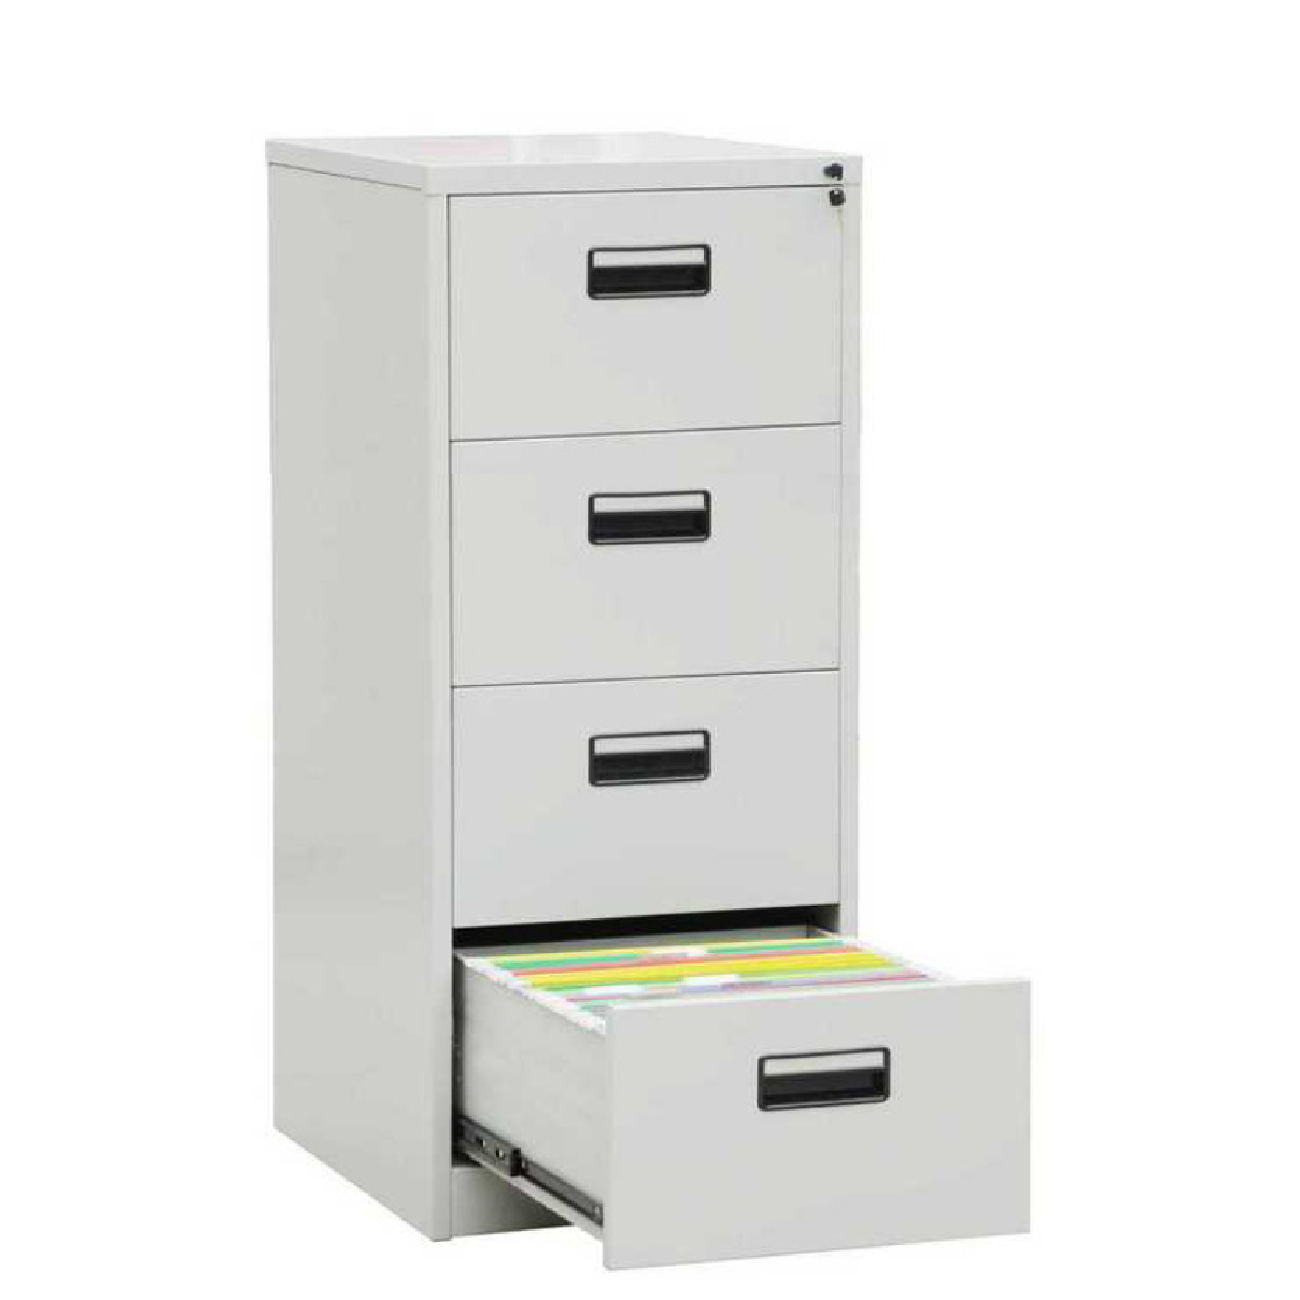 SY404, 4 DRAWER Filing Cabinet